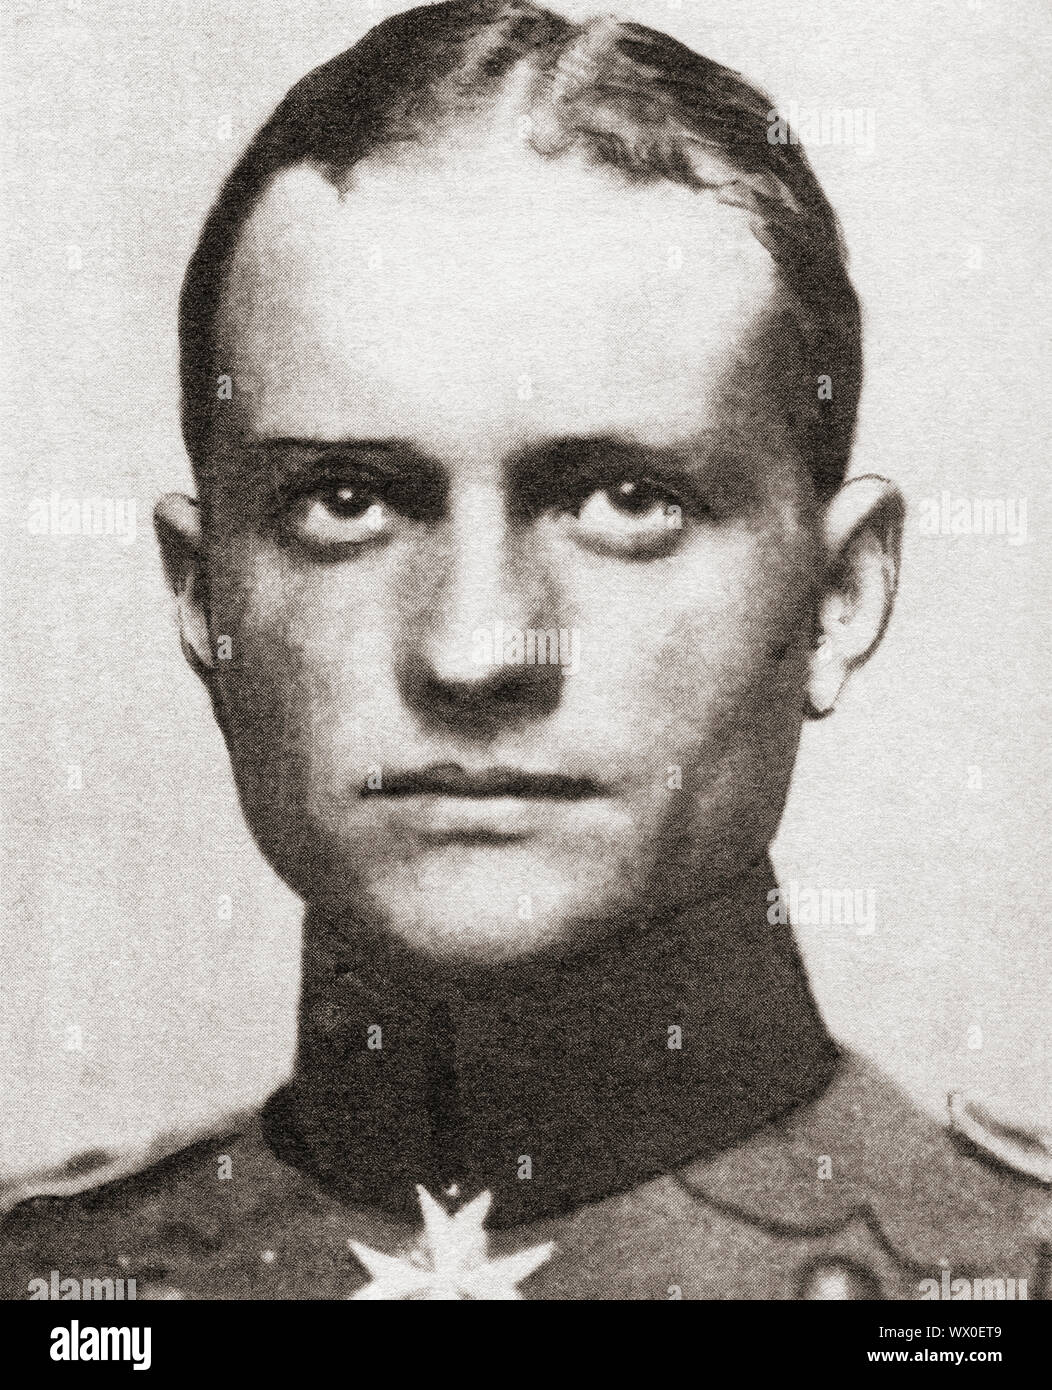 Manfred Albrecht Freiherr von Richthofen, 1892 –1918, aka the 'Red Baron'.  Fighter pilot with the German Air Force during World War I.  From The Pageant of the Century, published 1934. Stock Photo